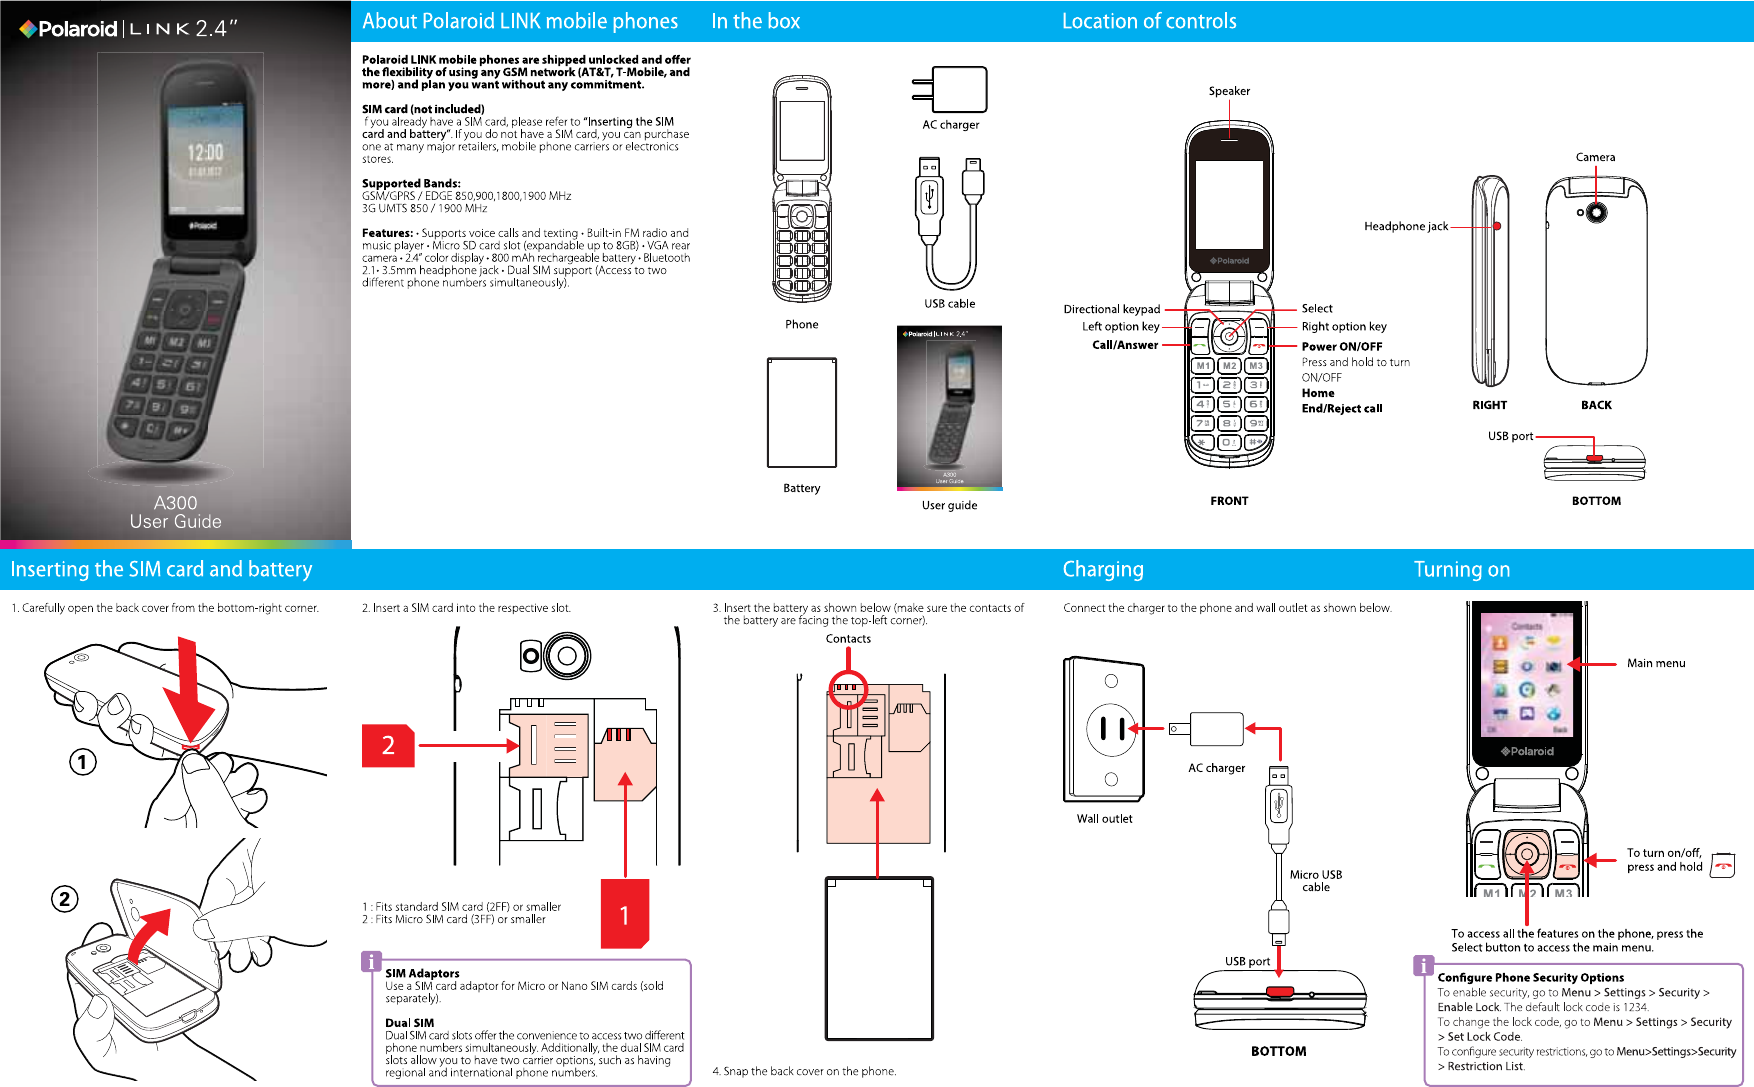 Southern Telecom A300 3G feature phone User Manual A300 User Guide